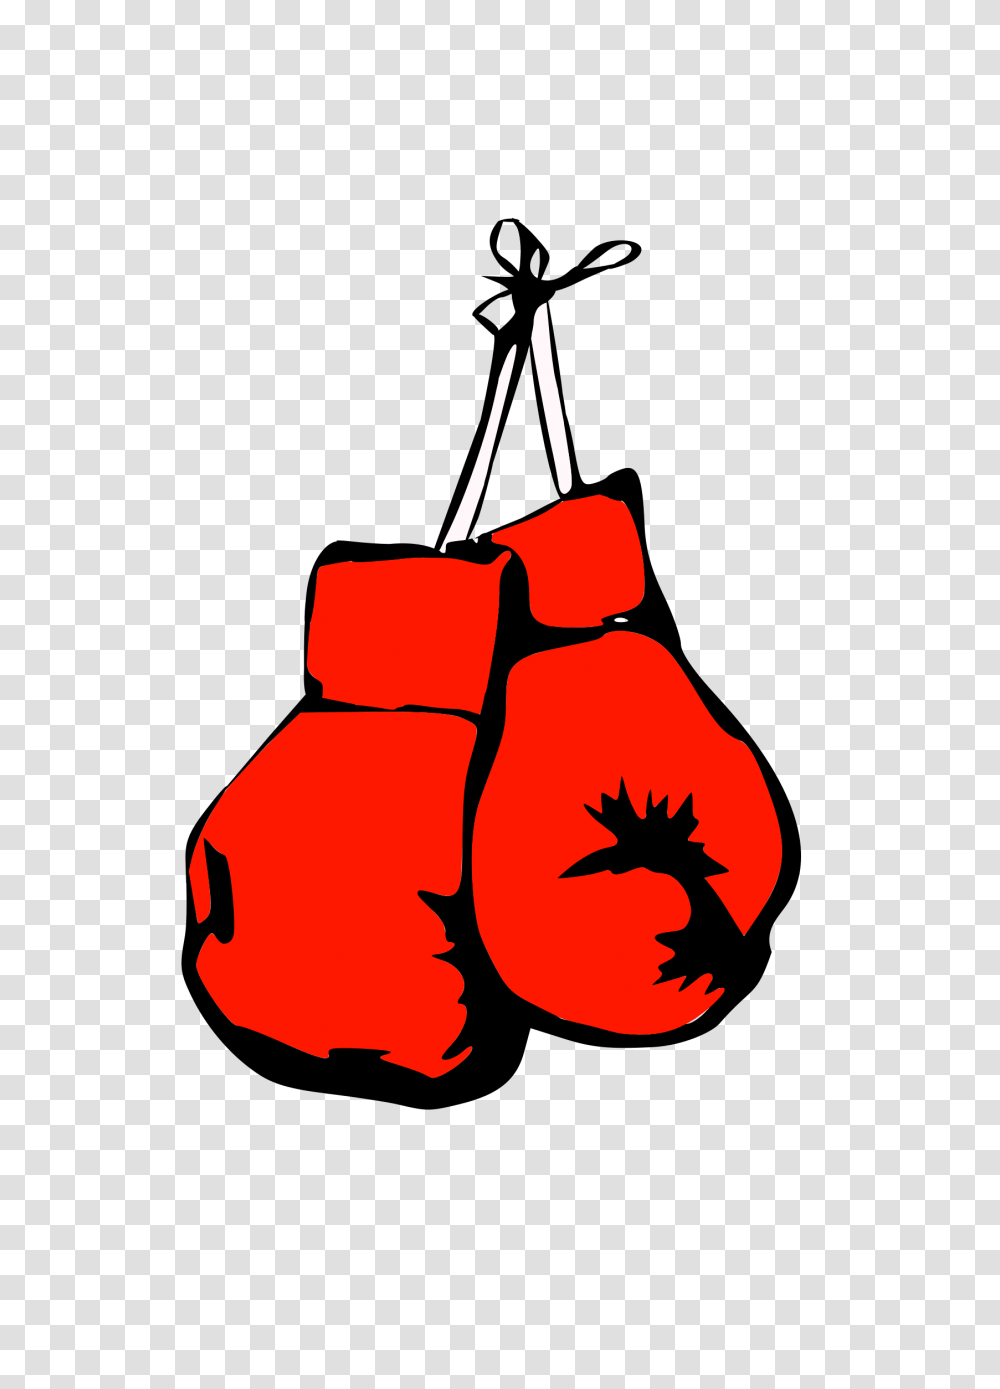 Boxing Gloves Fight Free Vector Graphic On Pixabay Red Boxing Gloves Cartoon, Bomb, Weapon, Weaponry, Dynamite Transparent Png